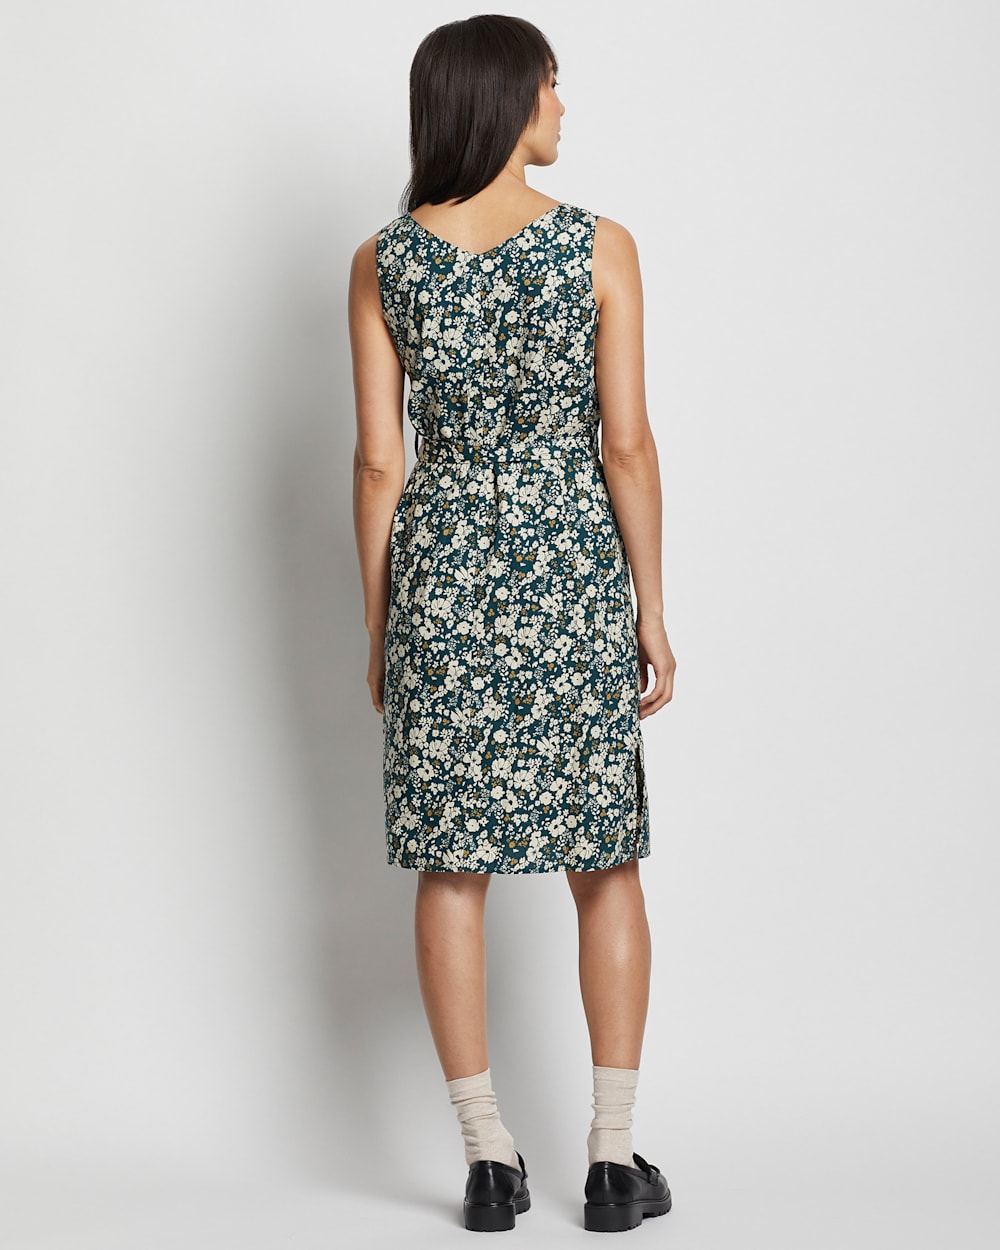 ALTERNATE VIEW OF WOMEN'S SLEEVELESS COTTON DRESS IN PINE GREEN MULTI FLORAL image number 3